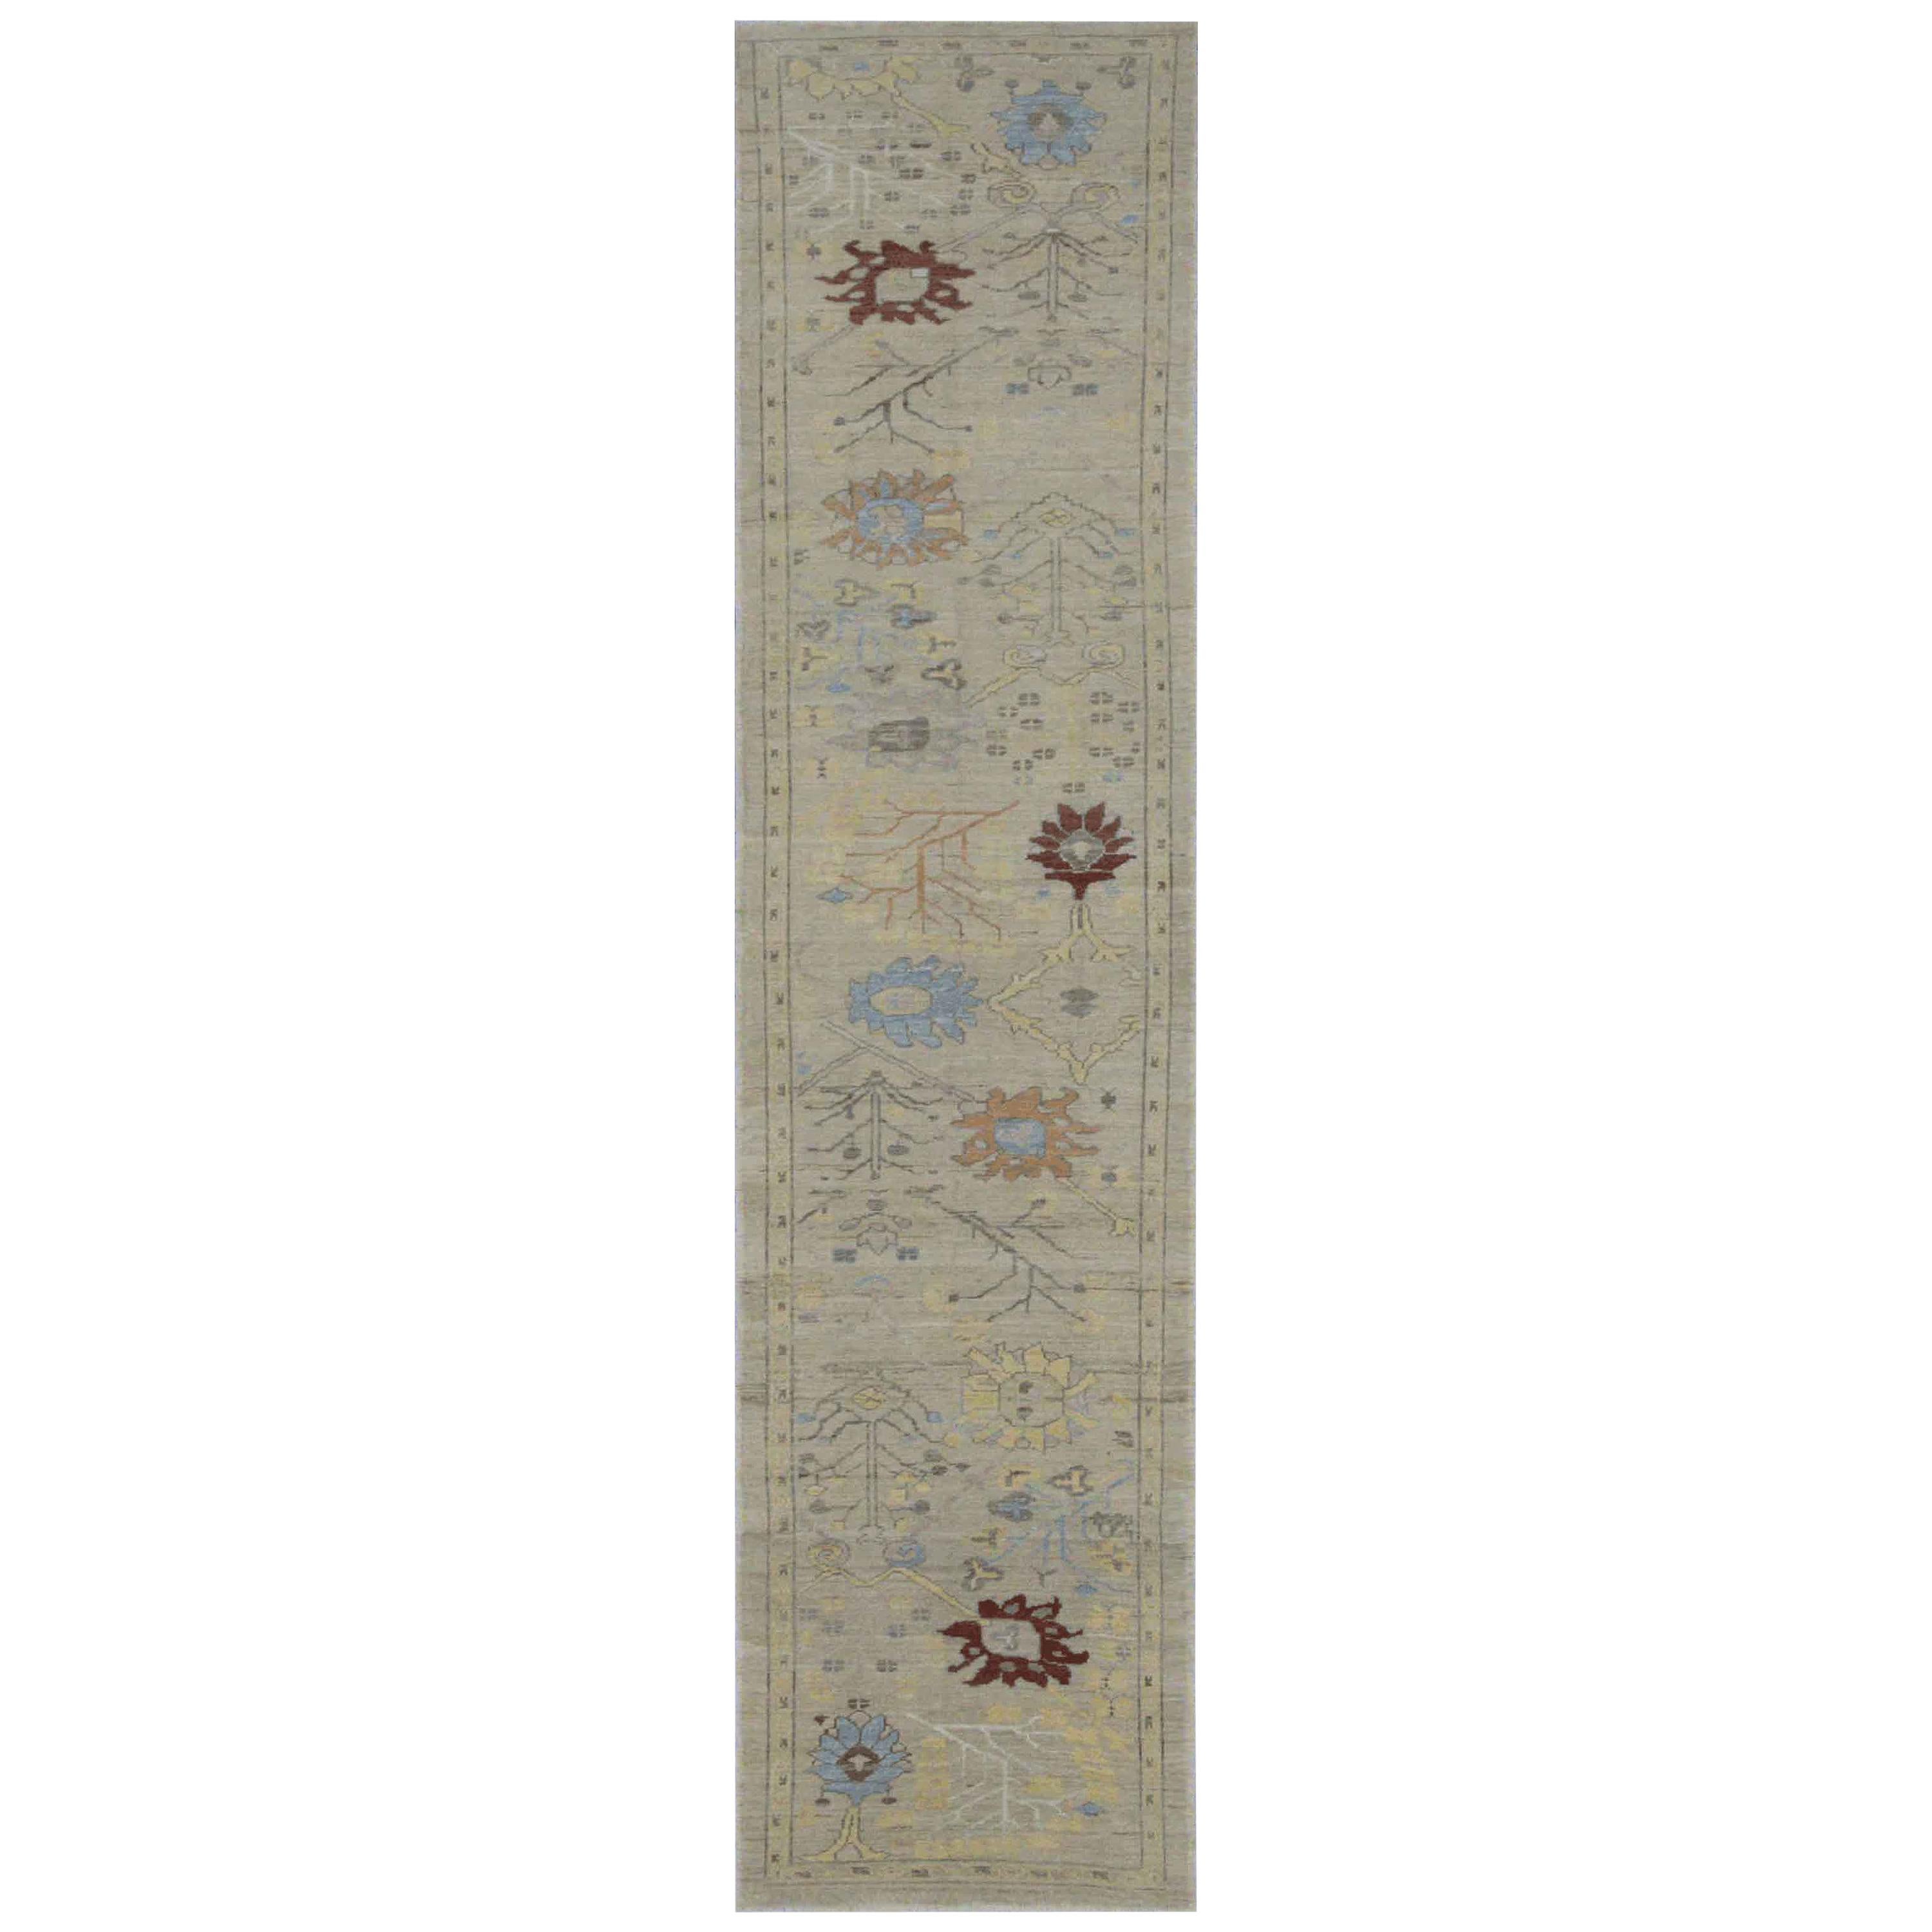 Modern Turkish Oushak Runner Rug in Ivory with Yellow and Blue Flowers Design